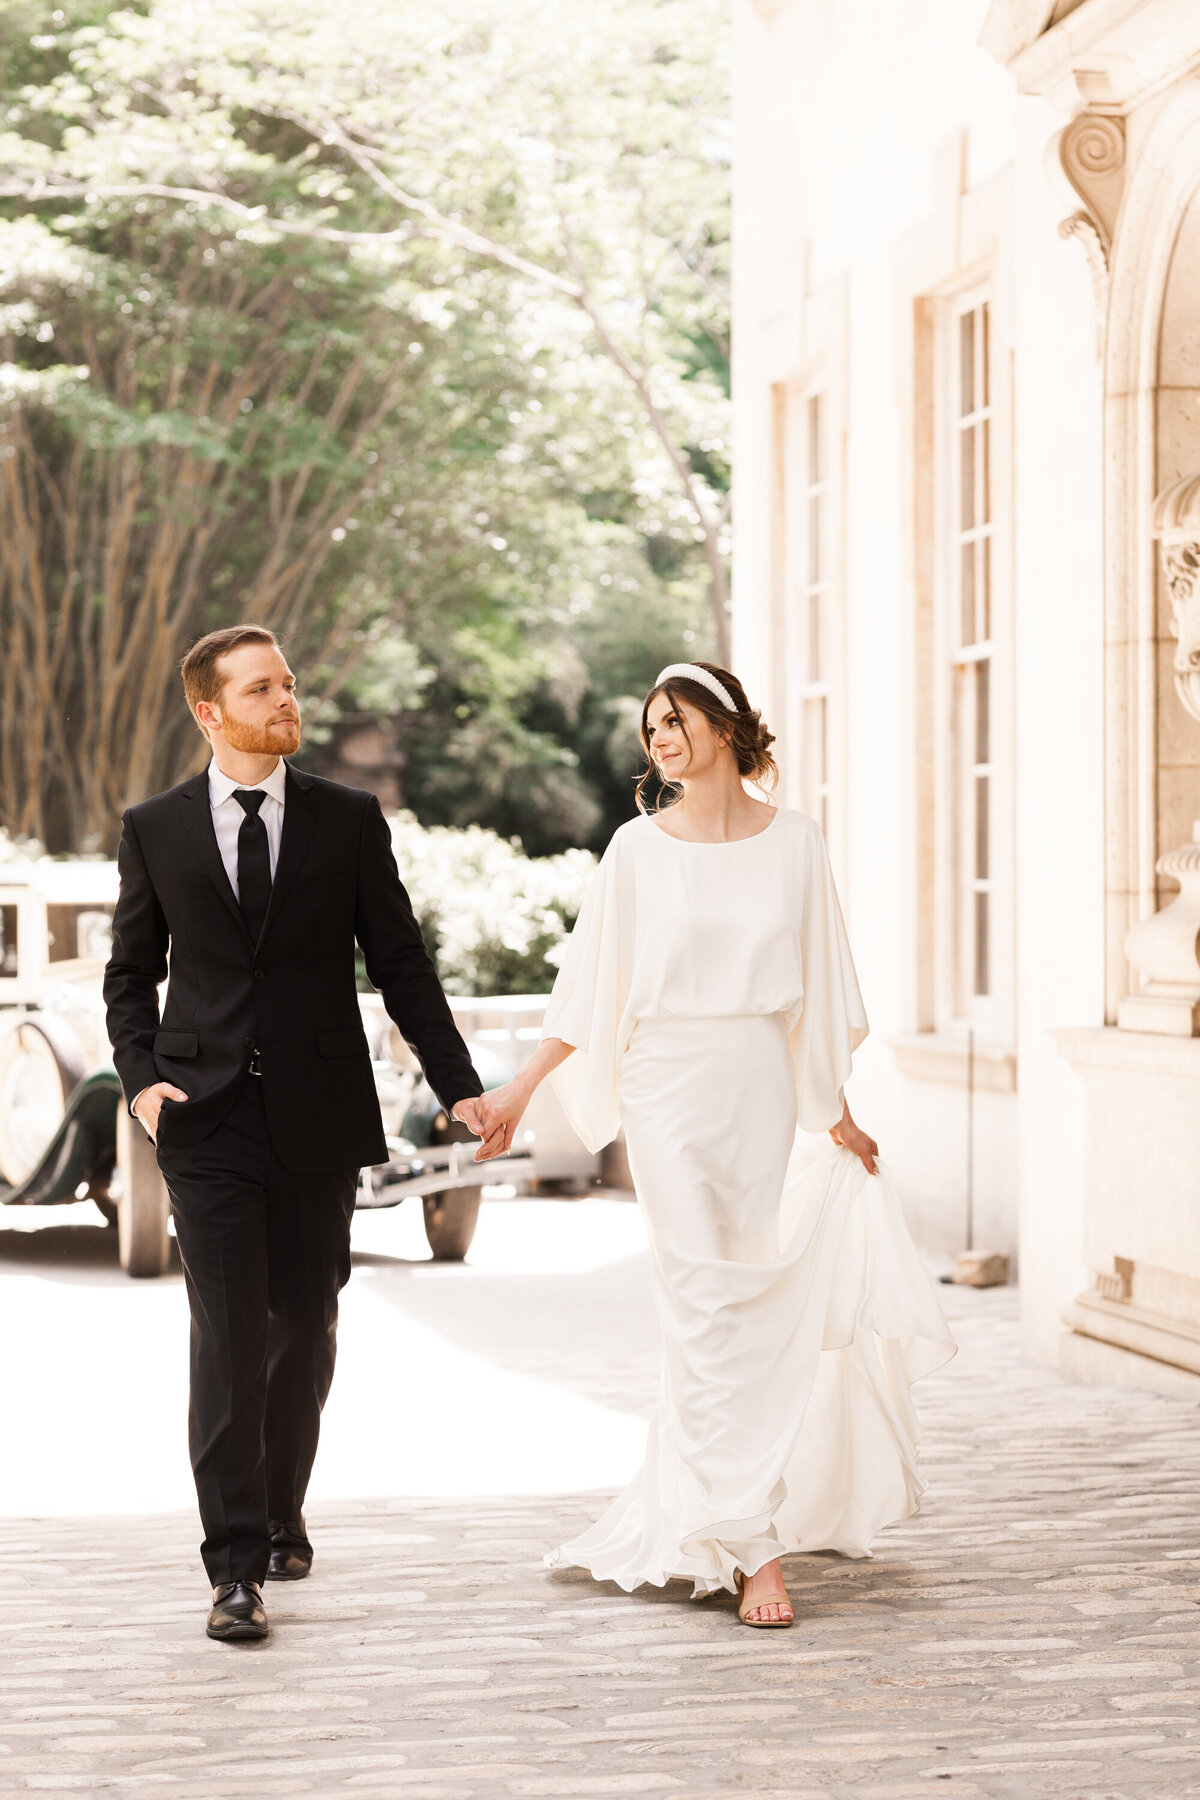 bride and groom walking together in front of a house